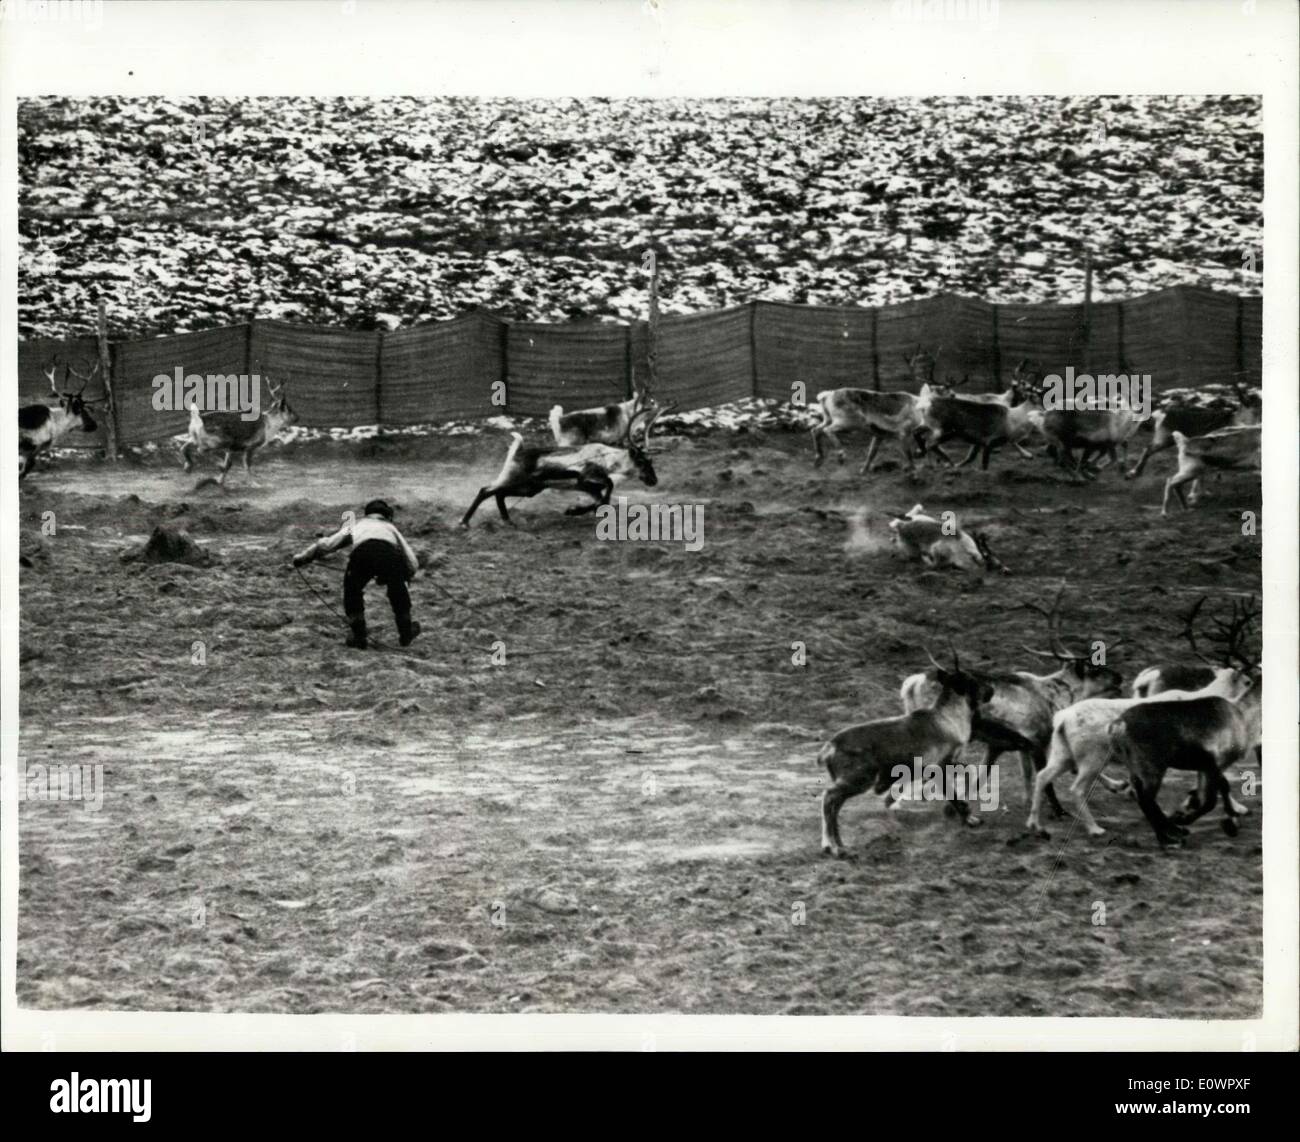 Jan. 16, 1964 - Reindeer Slaughtering In Greenland: For the past twelve years, a new ''industry'' has been pioneered in Greenland, based on the import of Norwegian reindeer, which are being successfully bred so that the herds now number several thousand animals which are being used for their meat. The young herdsmen all come from Lapland, and have to serve an apprenticeship of about four years, following the herds on foot in the summer, and by ski in the winter, stopping overnight in little huts Stock Photo